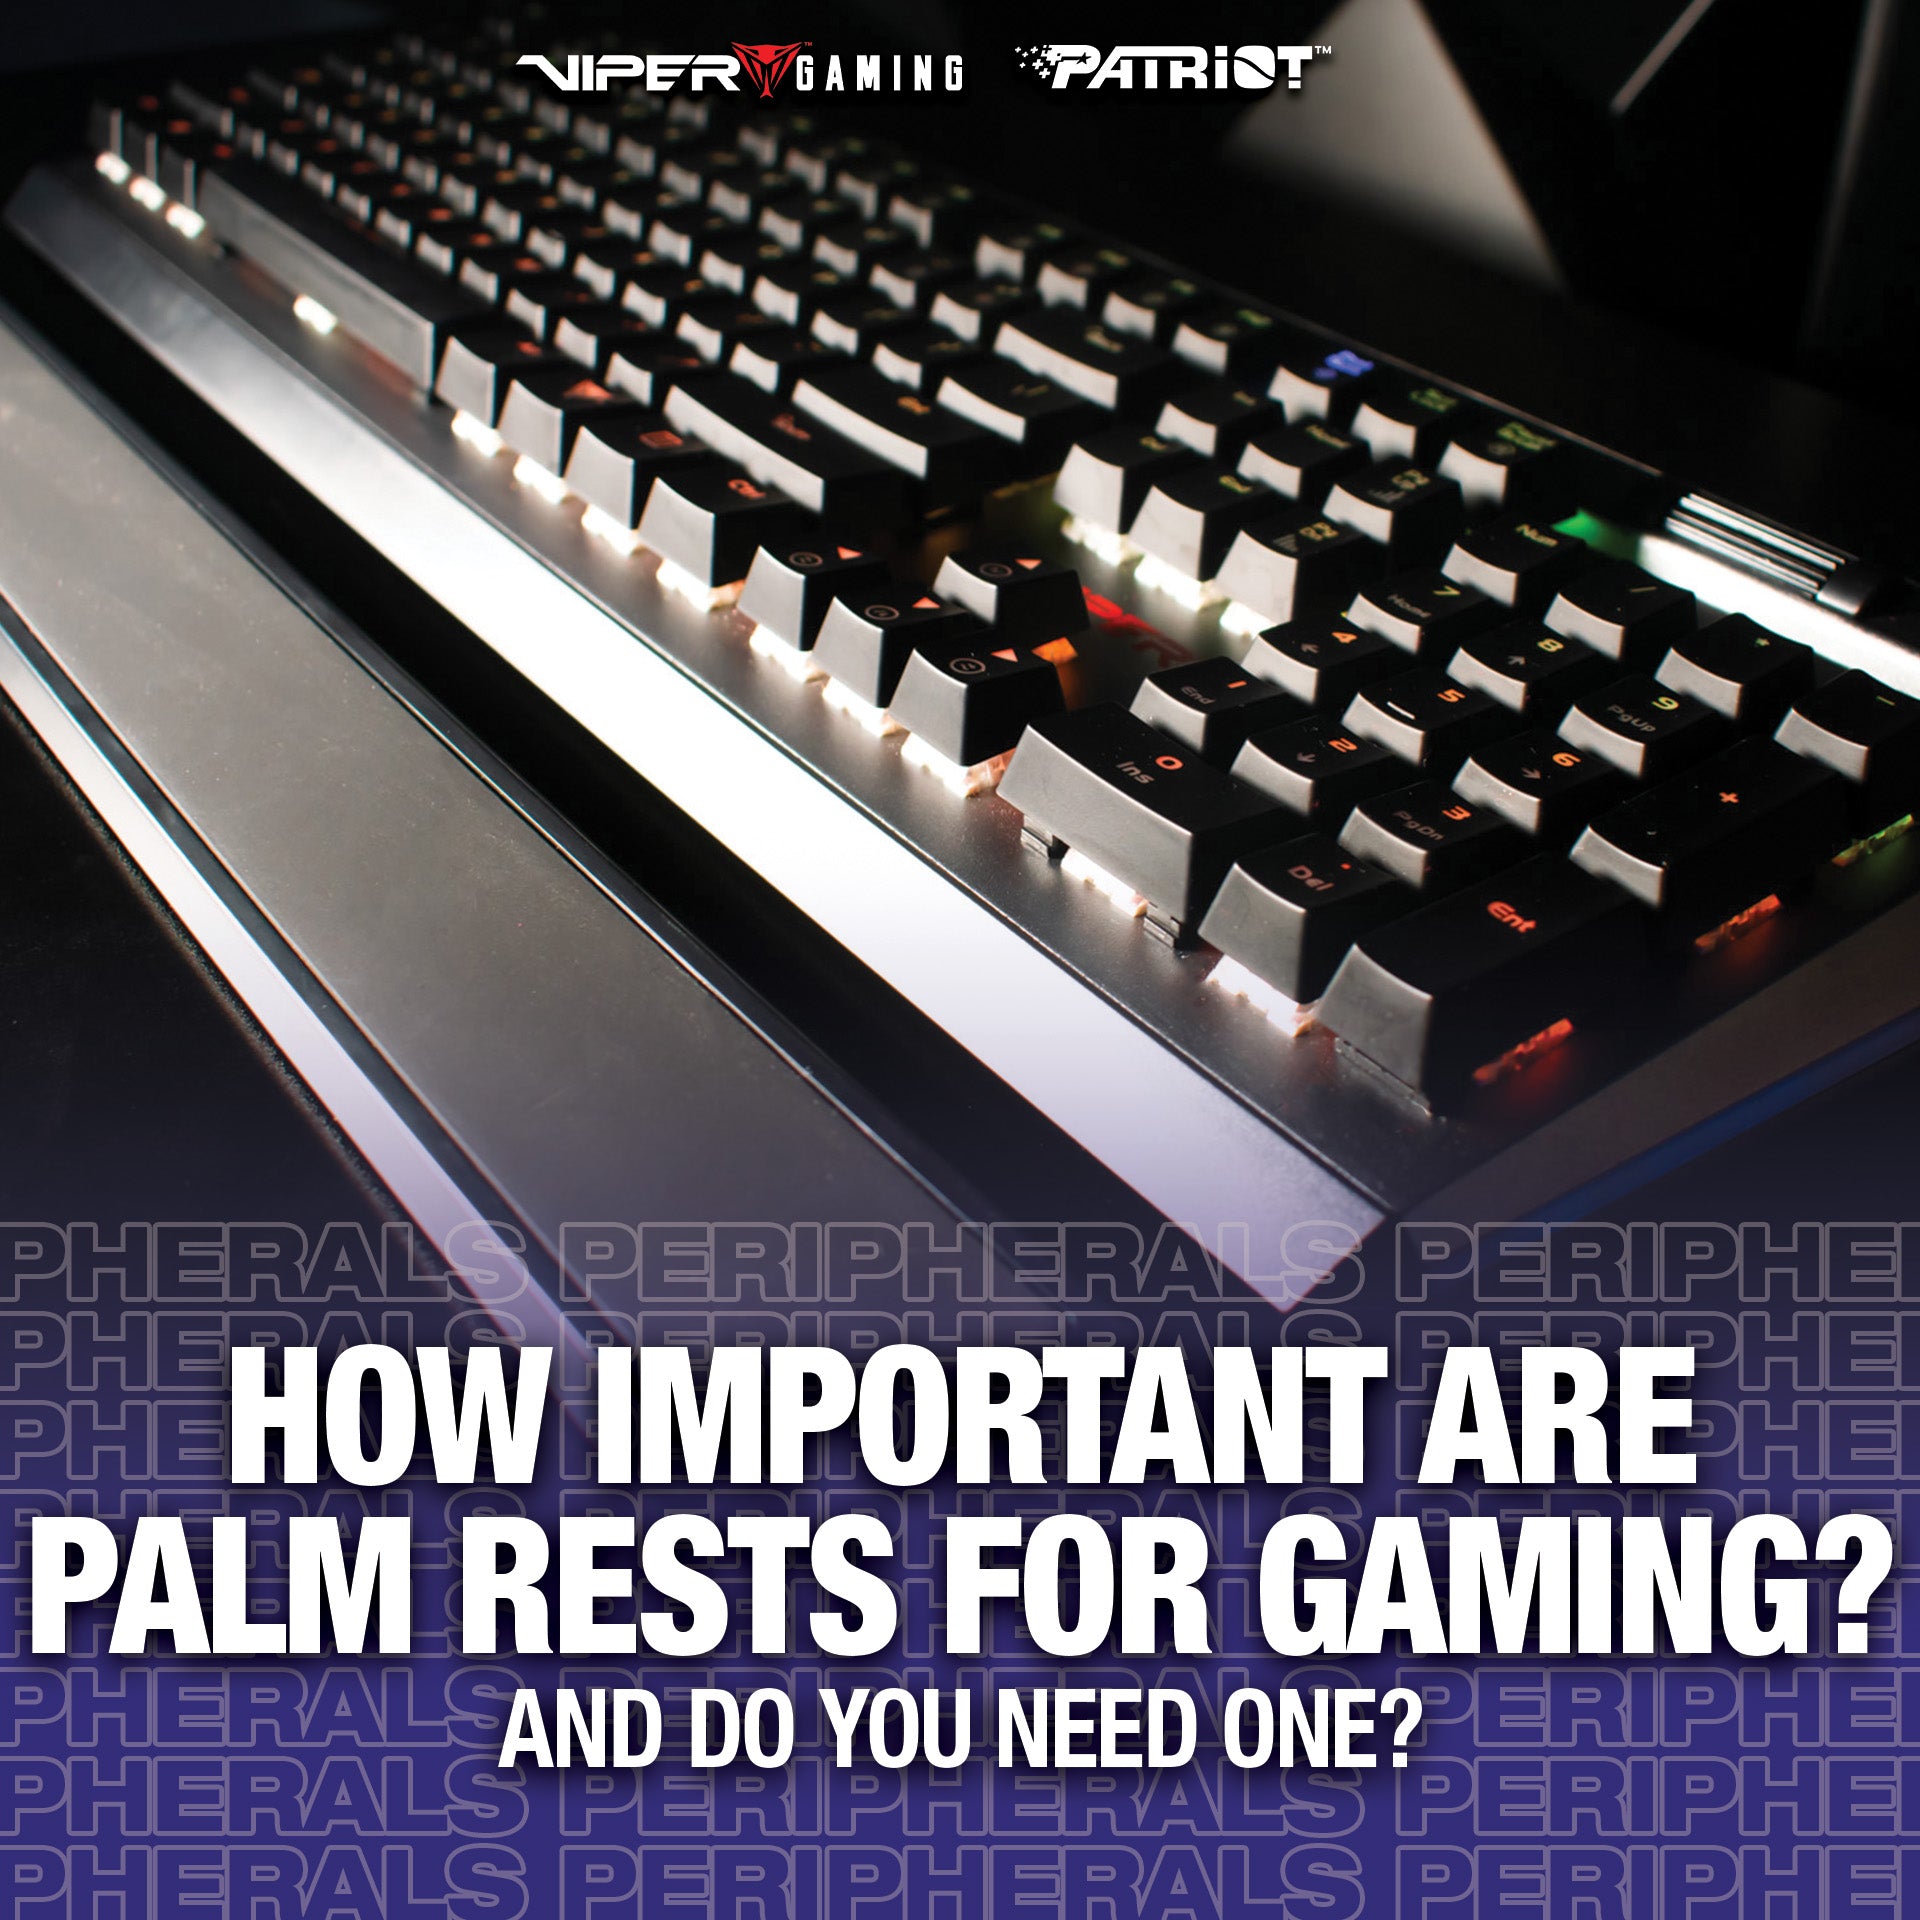 How Important Are Palm Rests for Gaming?